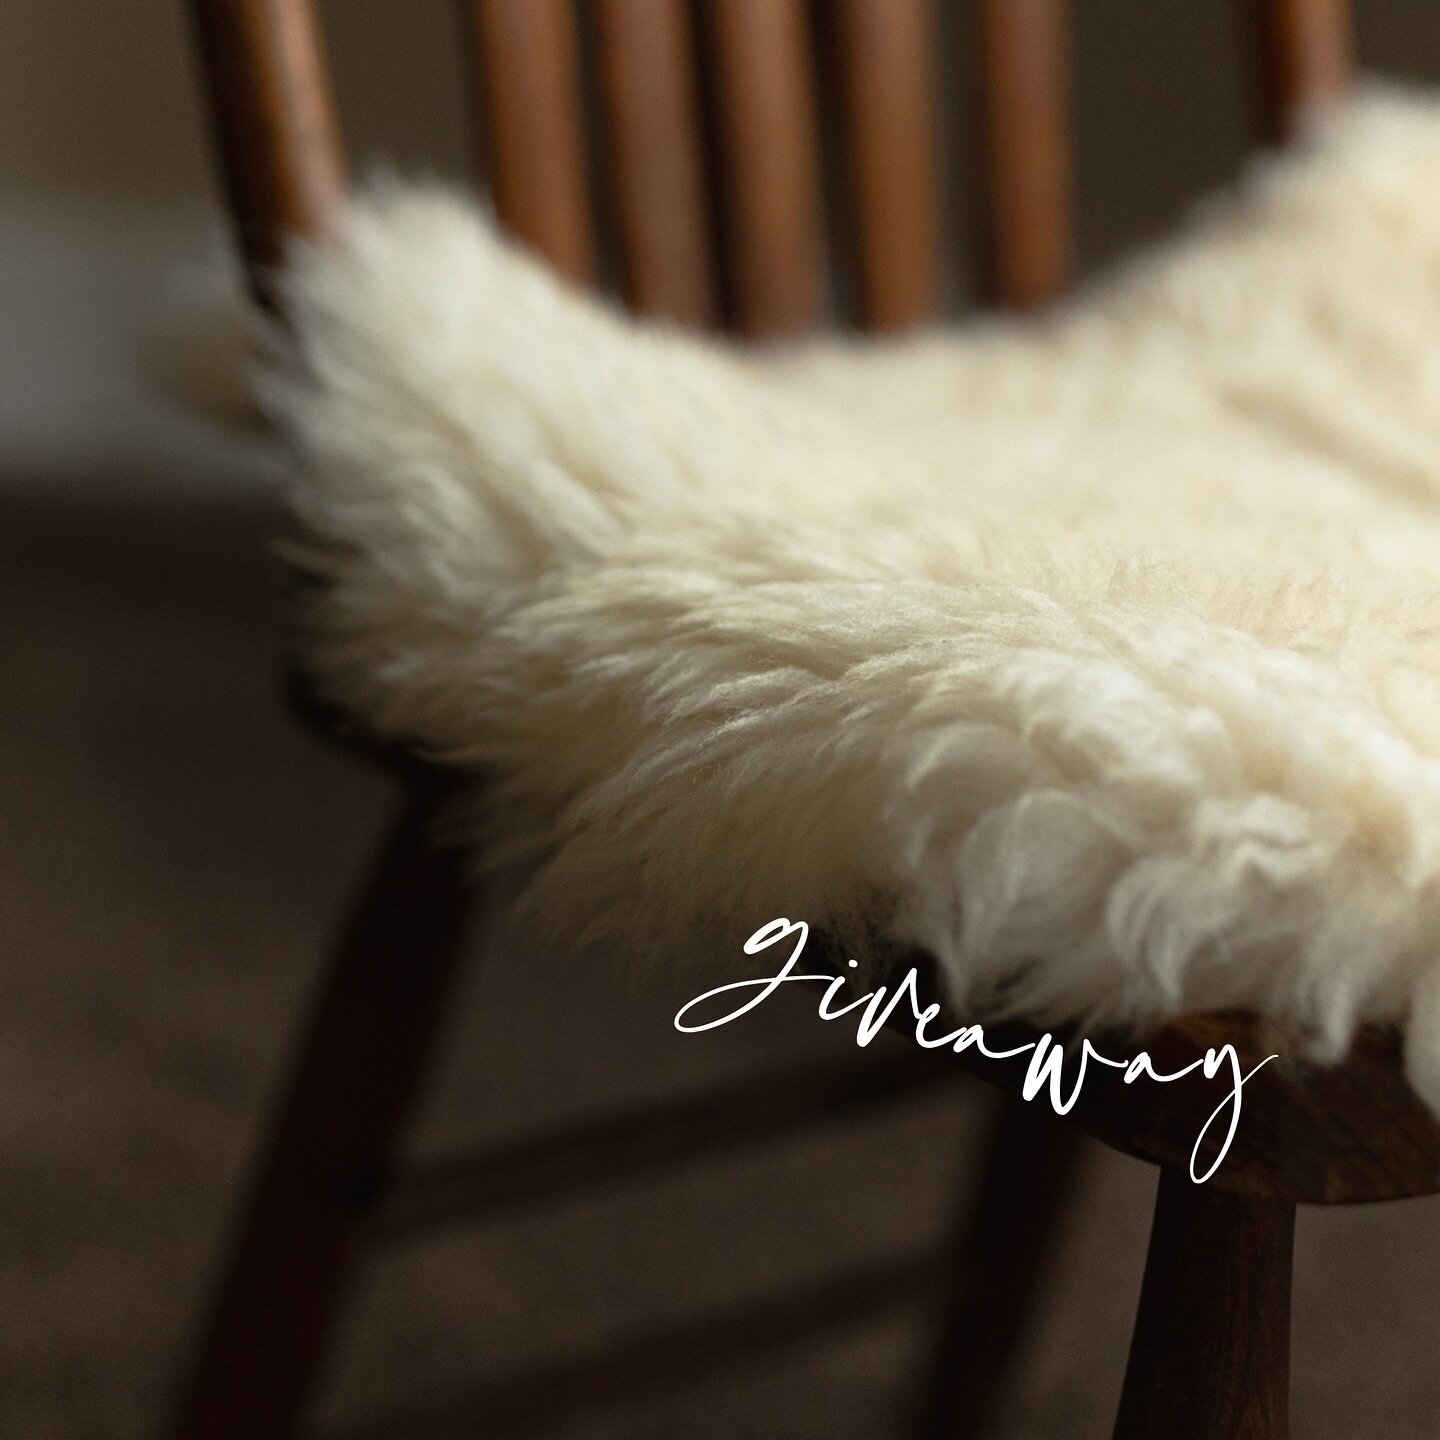 G I V E A W A Y 

Enter to win one square sheepskin from our shop! Valued at $35

Sheepskin have incredible medicinal benefits. To learn more about the benefits, read our post about sheepskins and our sheepskin highlight! So many people have seen inc